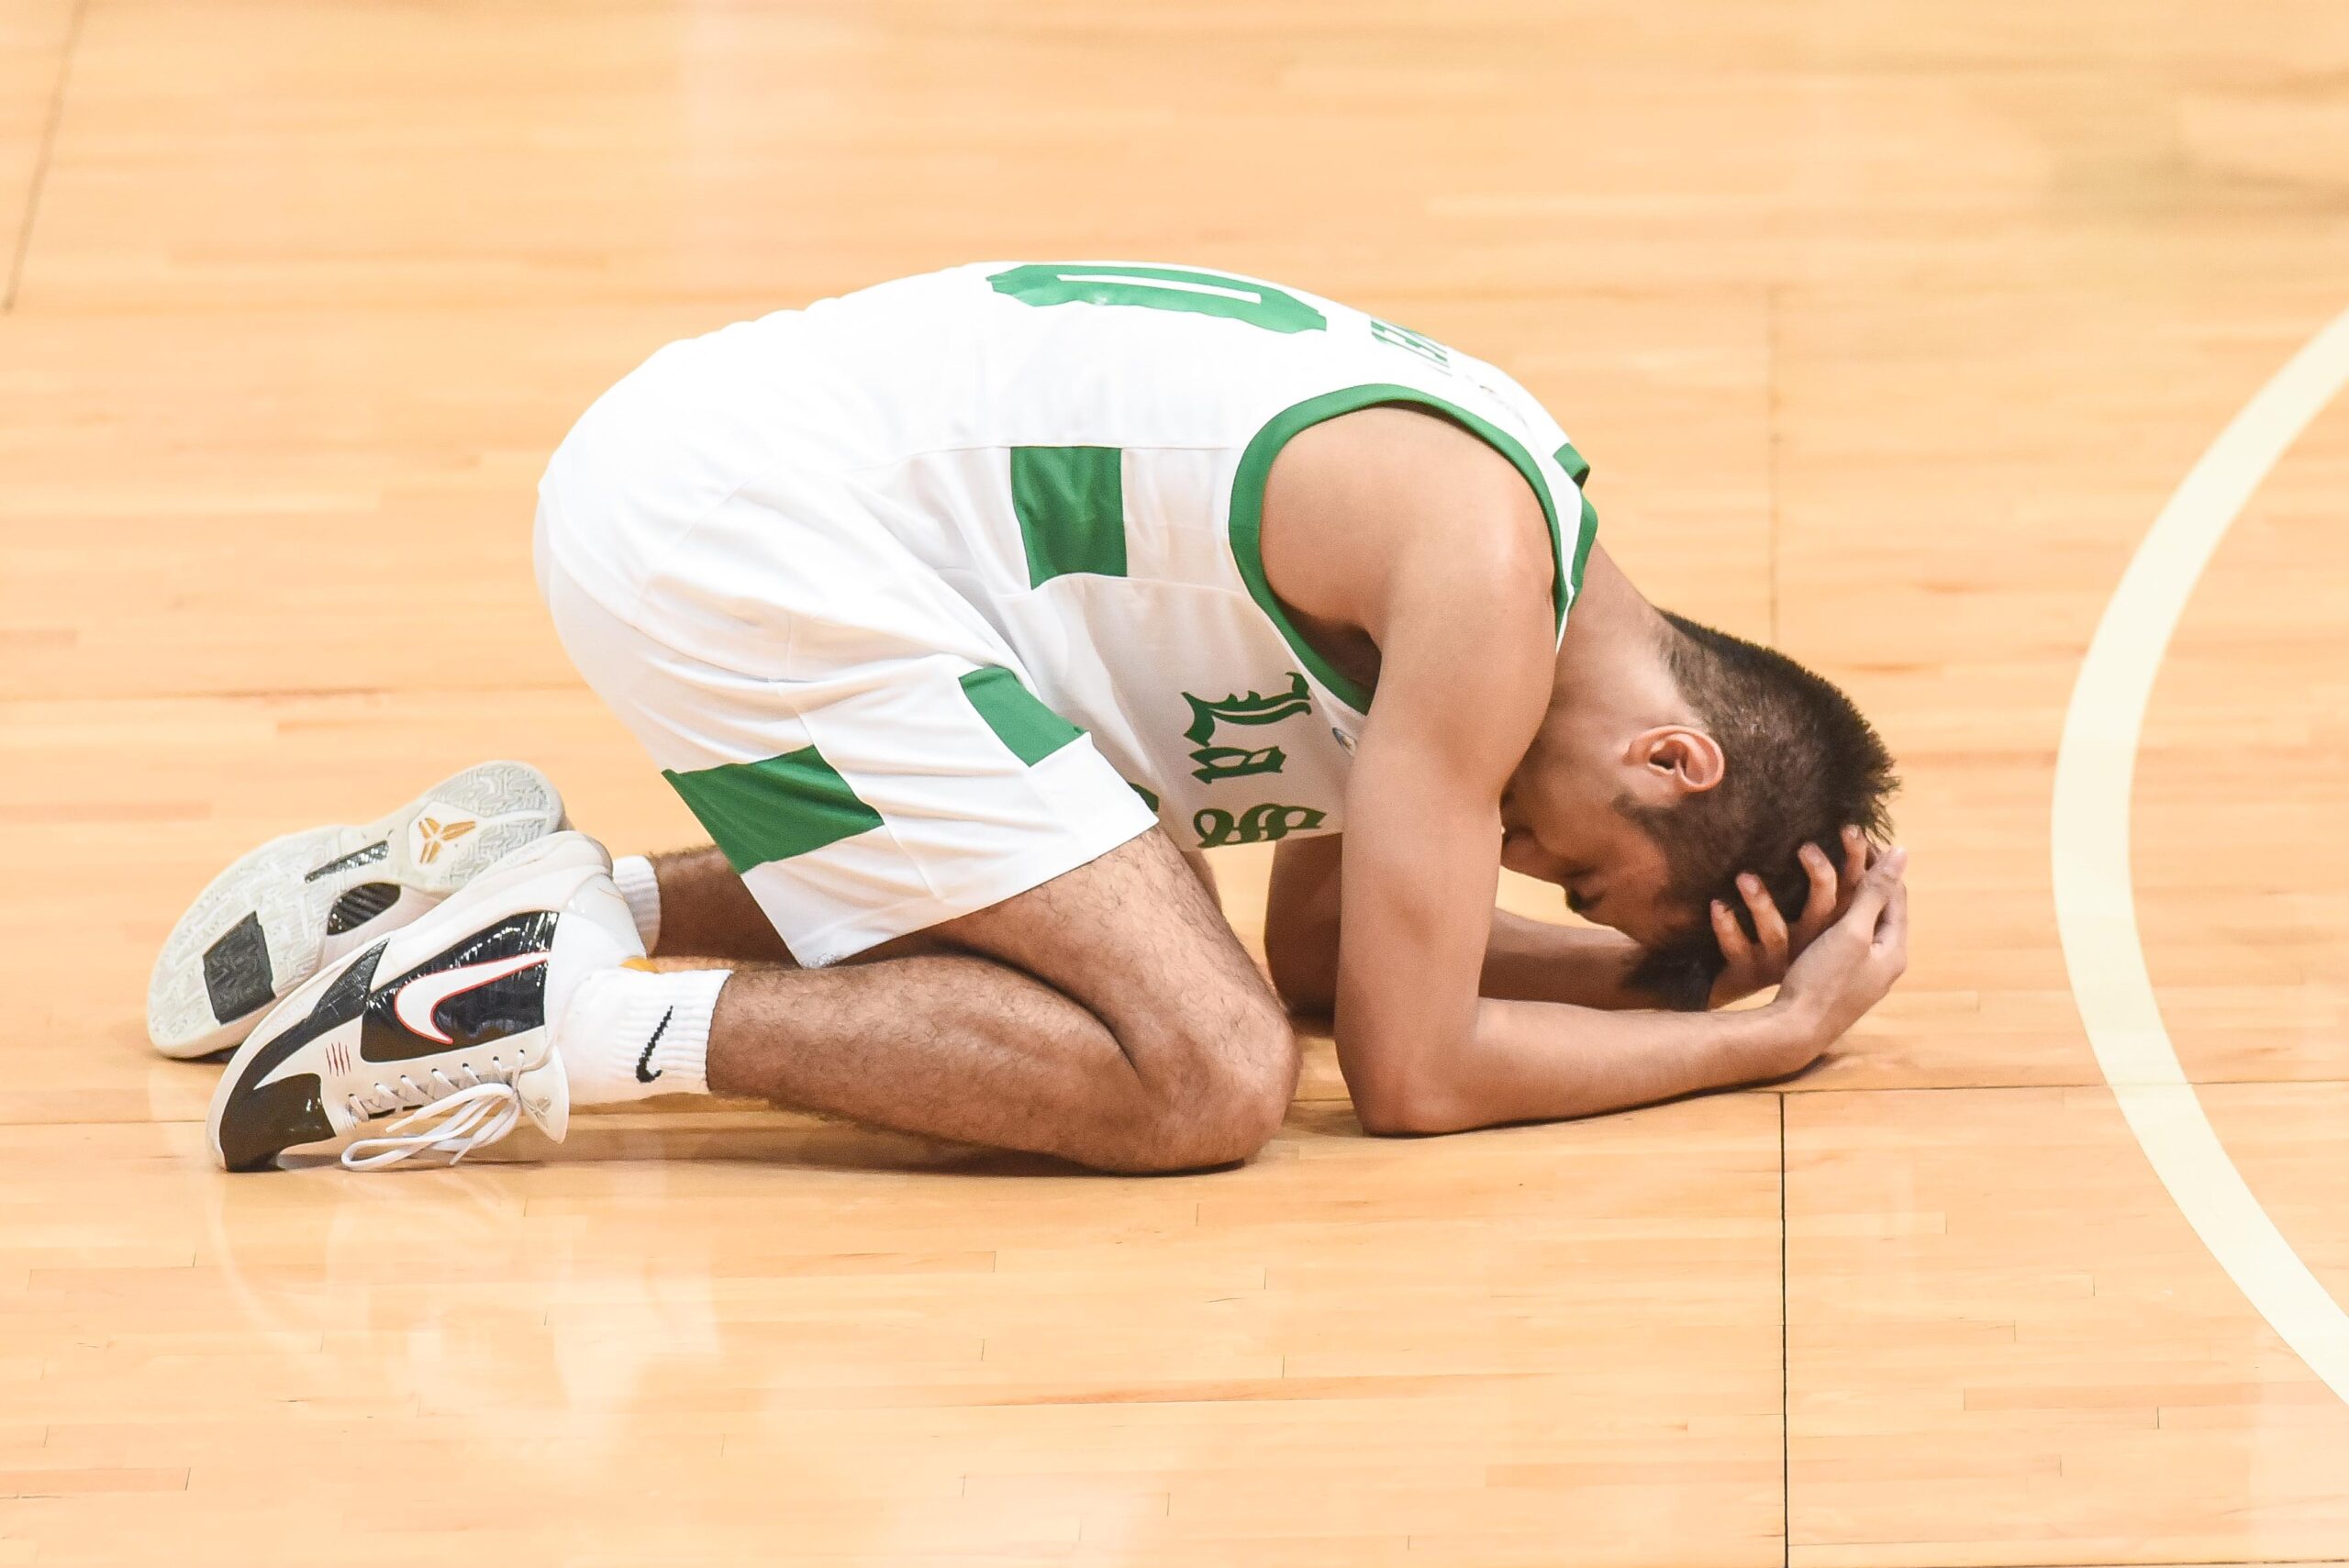 UAAP-84-Mens-Basketball-DLSU-vs-UP-Evan-Nelle-2-scaled UAAP 84: Tamayo powers UP's miracle comeback vs La Salle, punches Finals ticket Basketball DLSU News UAAP UP  - philippine sports news